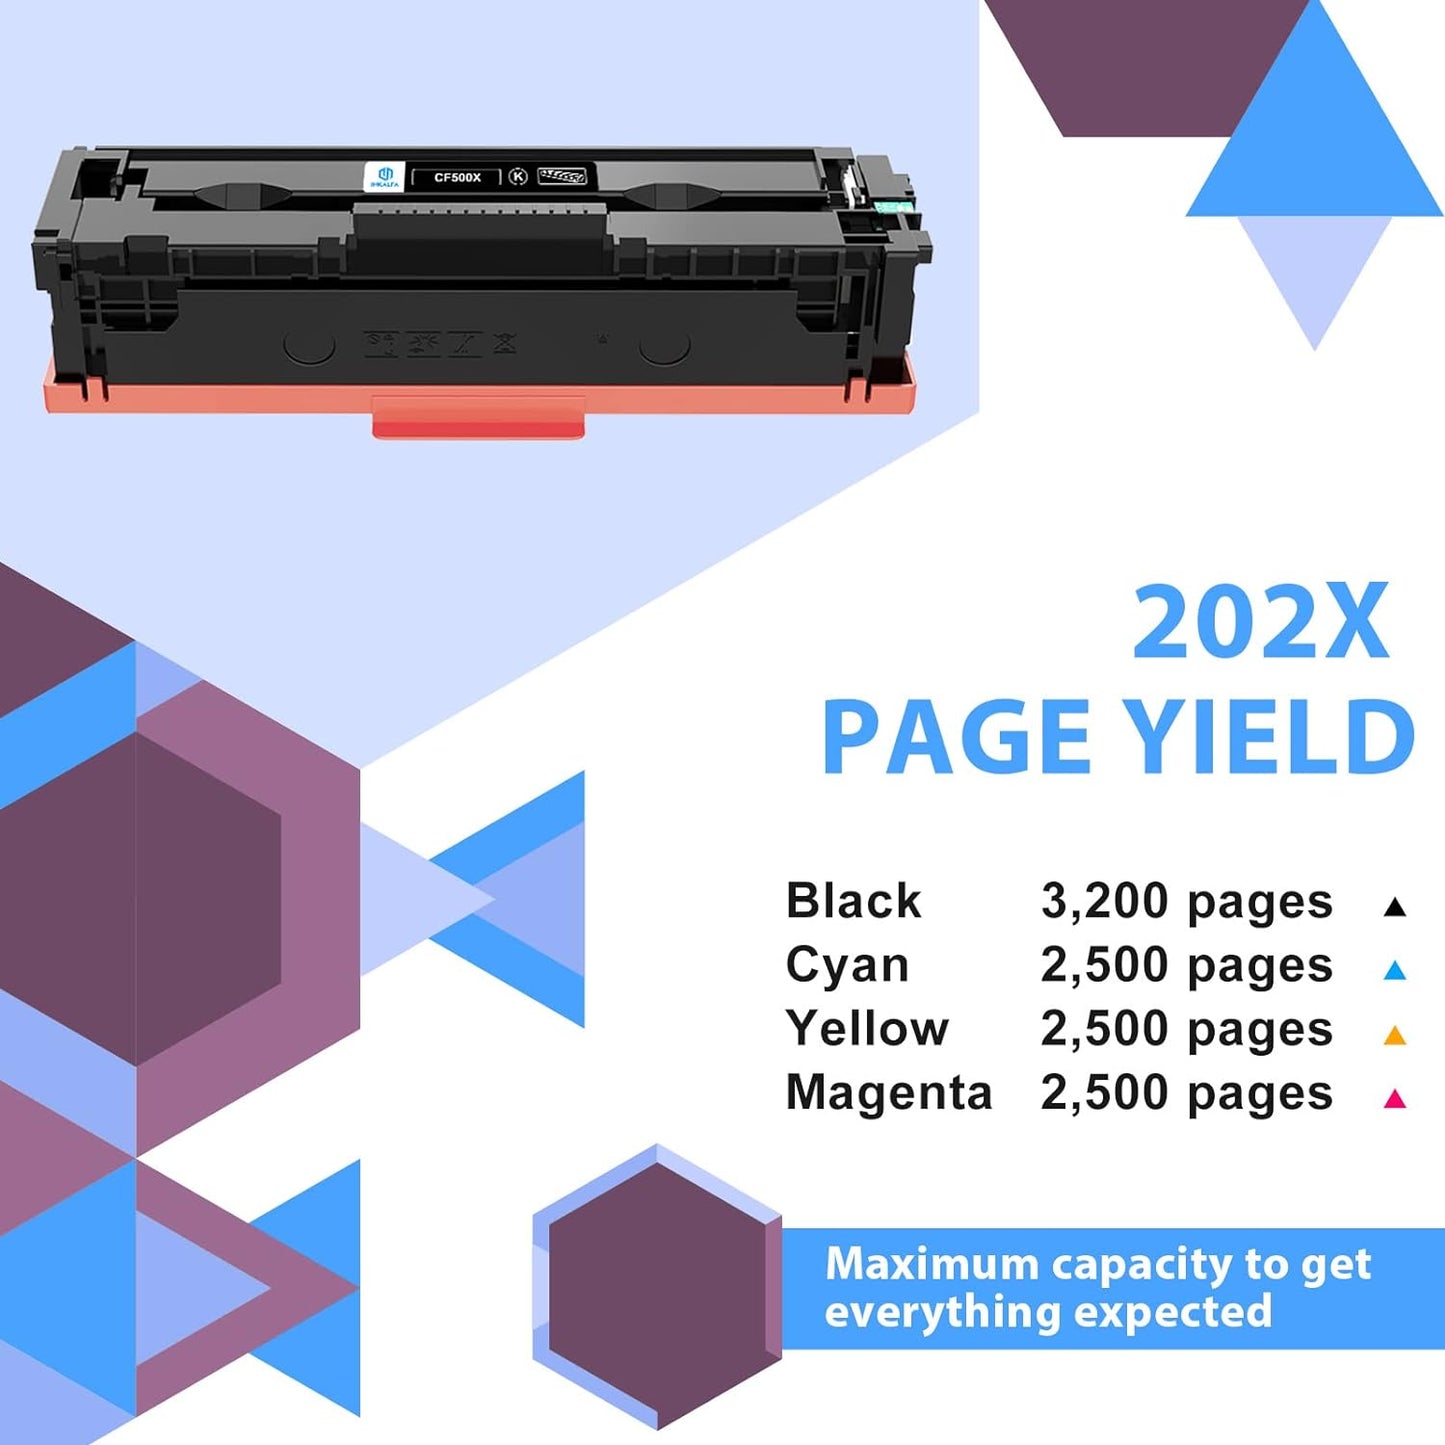 202X Toner 4 Pack High-Yield Replacement for HP 202X 202A CF500X CF501X CF502X CF503X for HP Color Laserjet Pro MFP M281fdw M281cdw M254dw M281fdn M281 Printer Ink Black Cyan Yellow Magenta With Chip